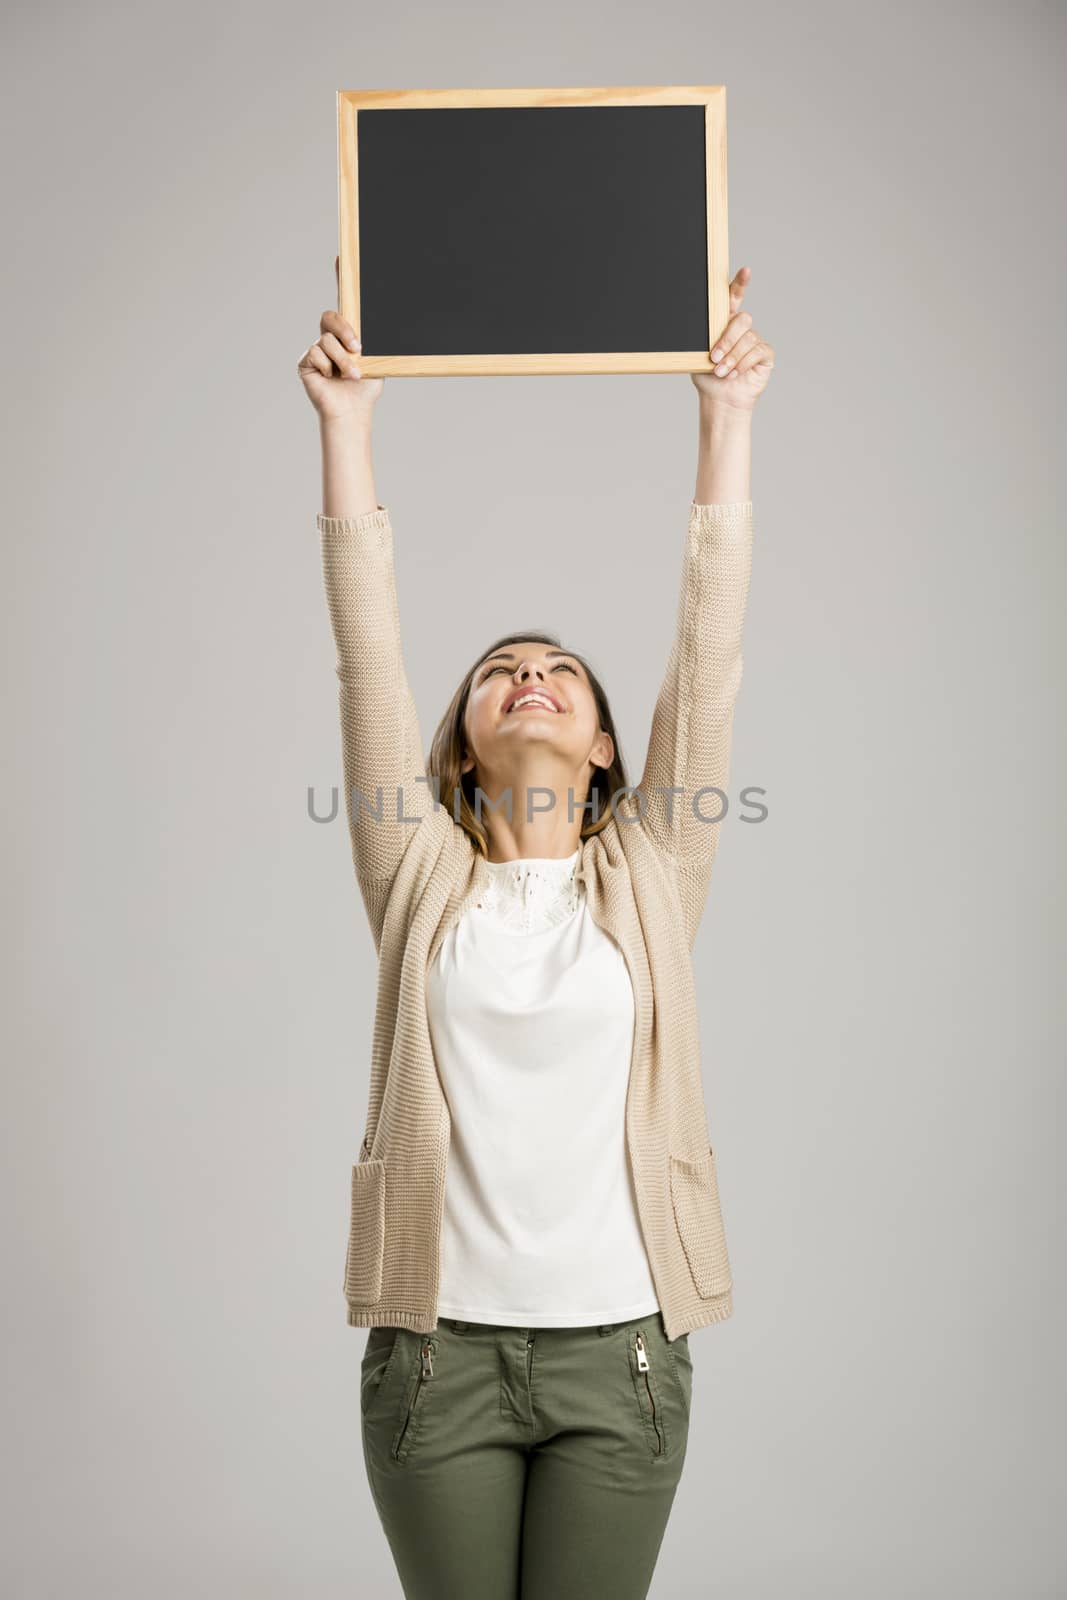 Woman showing something on a chalkboard by Iko